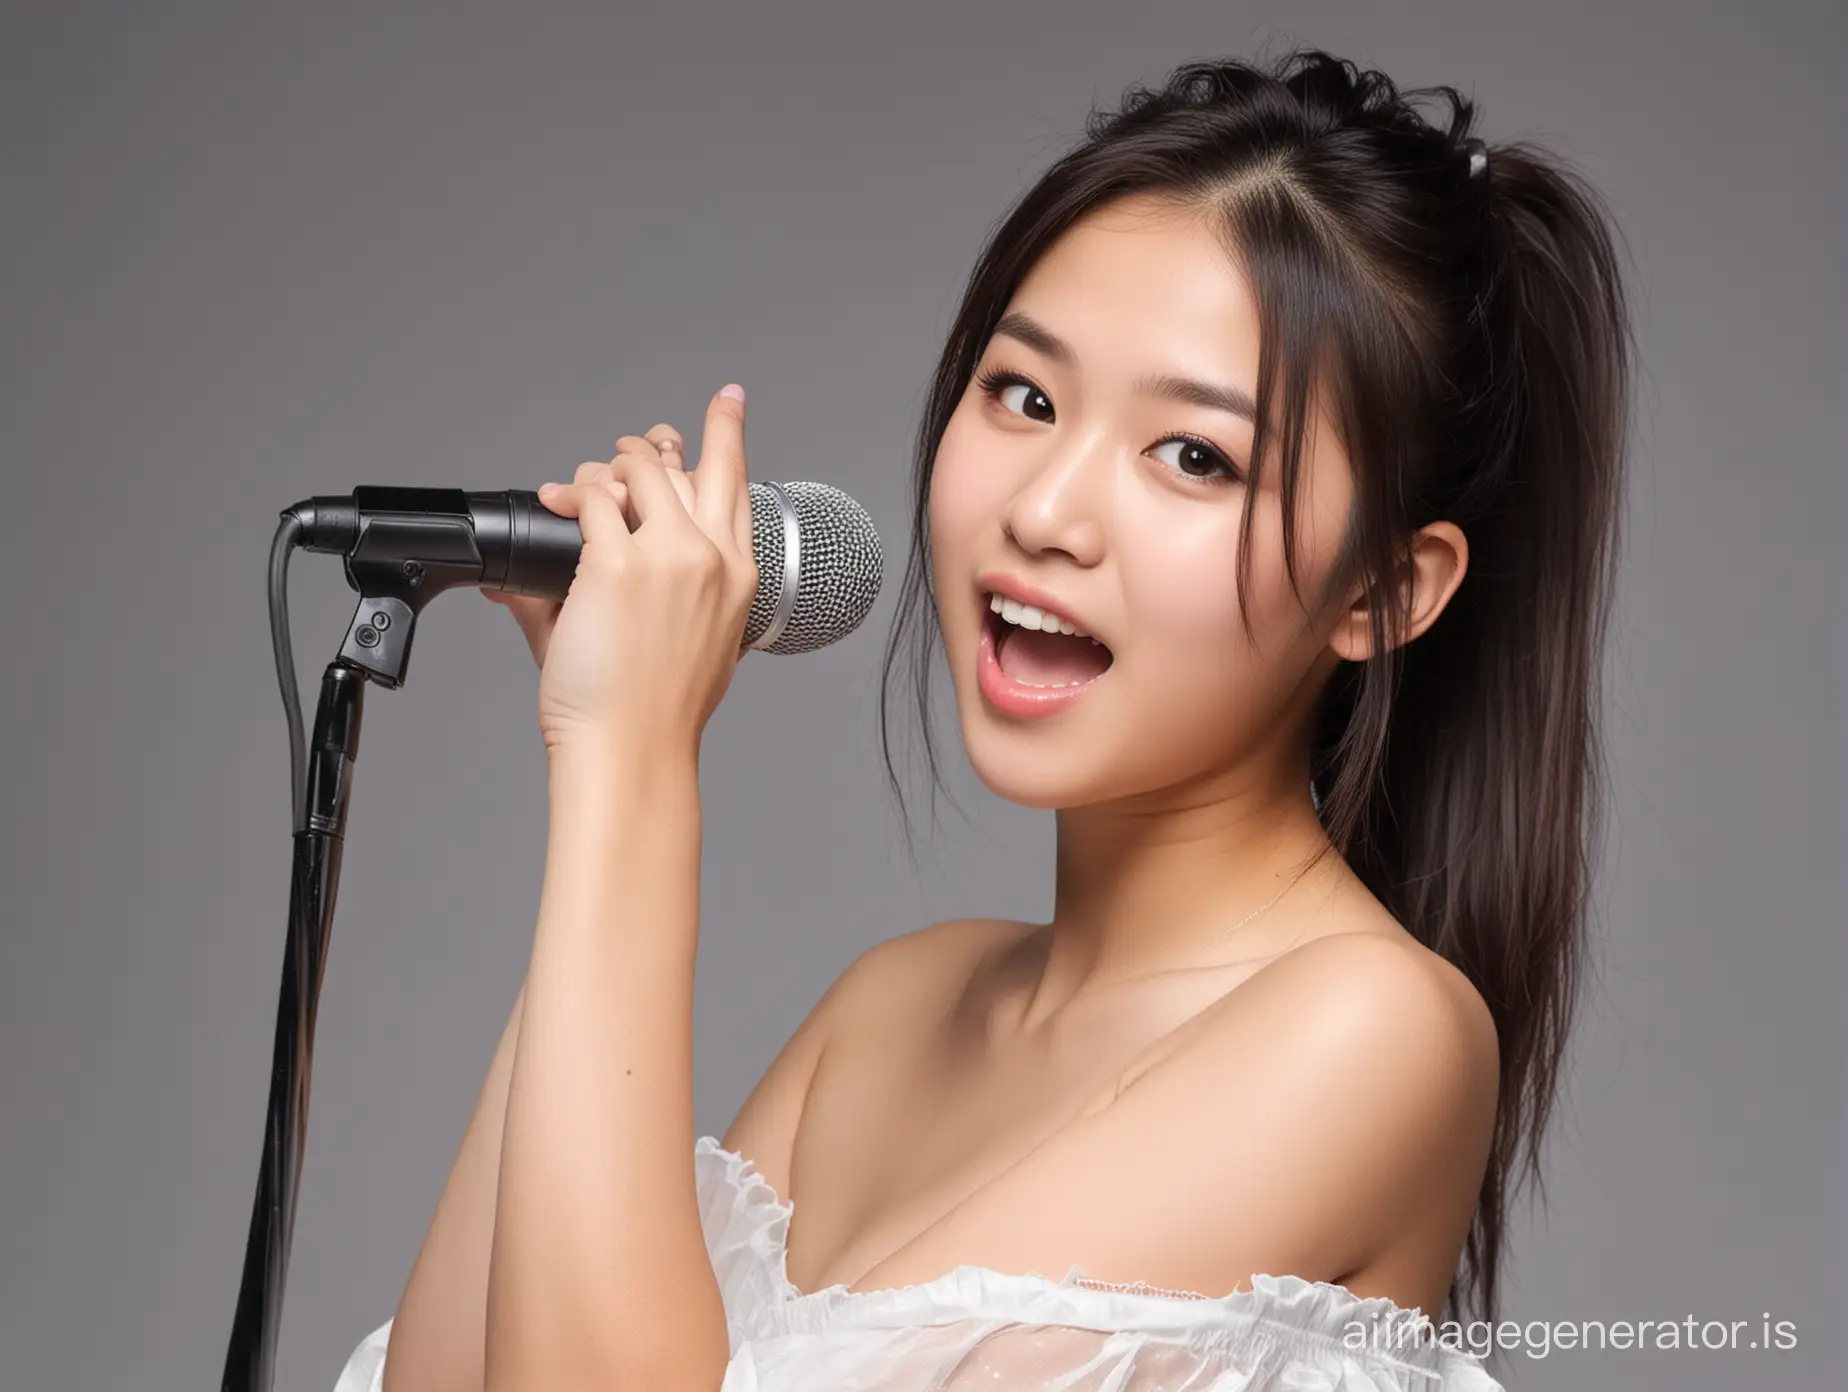 An Asian 18-year-old female singer holding a microphone with her hand and singing (it's important to depict normal finger expression), with clothes removed below the waist.